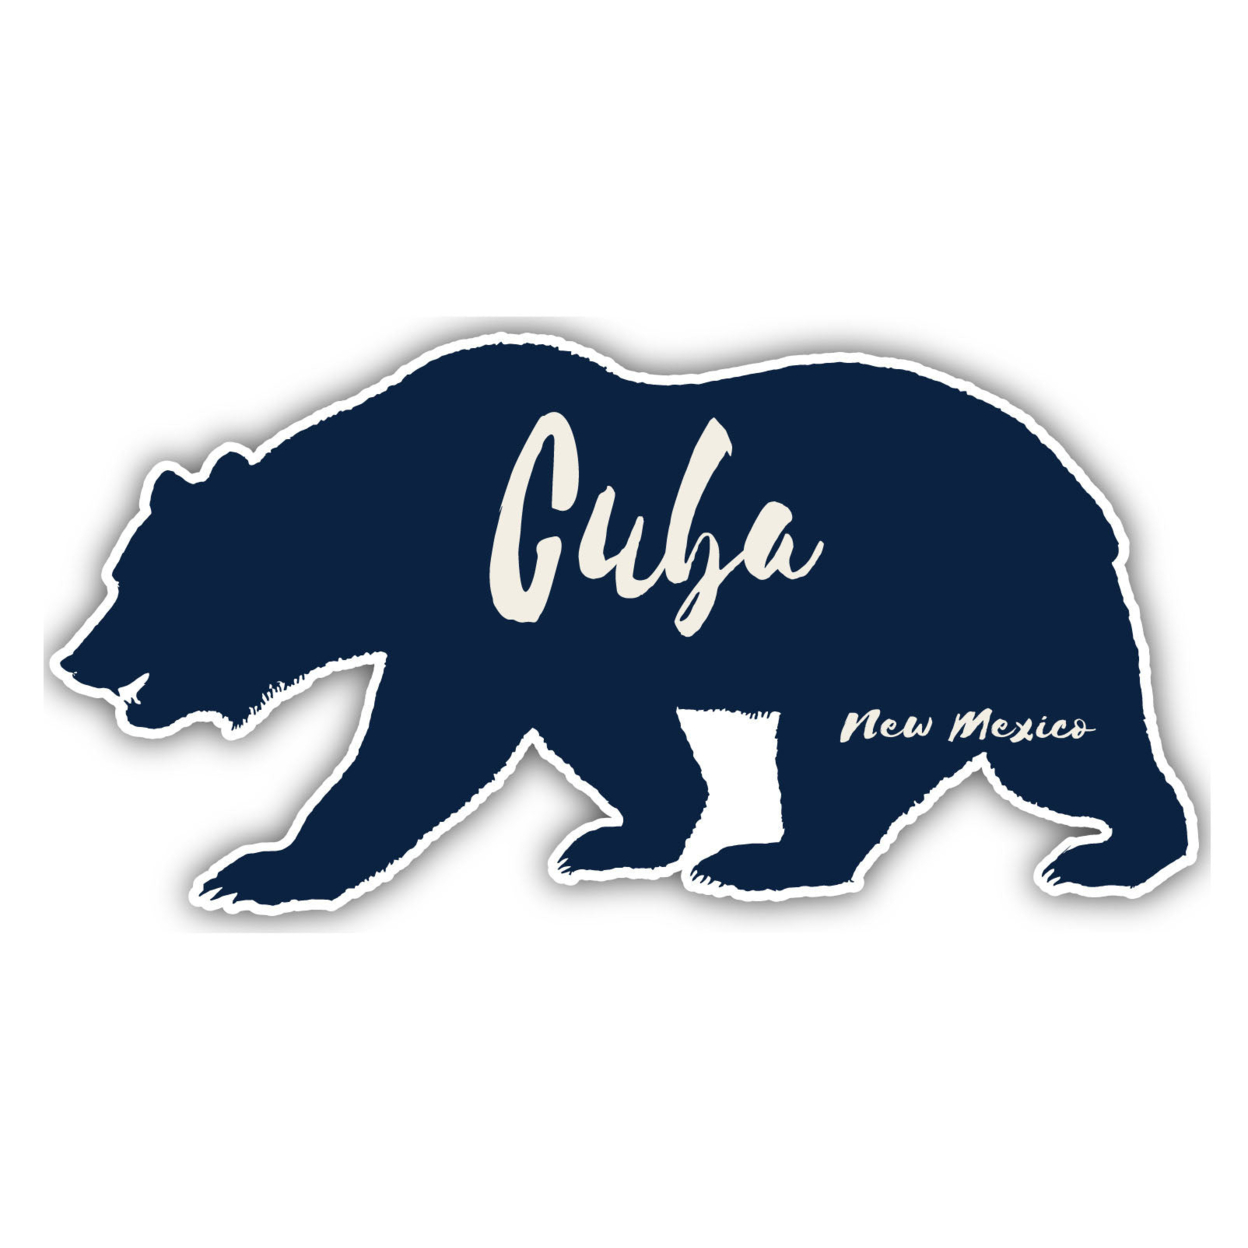 Cuba New Mexico Souvenir Decorative Stickers (Choose Theme And Size) - 4-Pack, 8-Inch, Bear